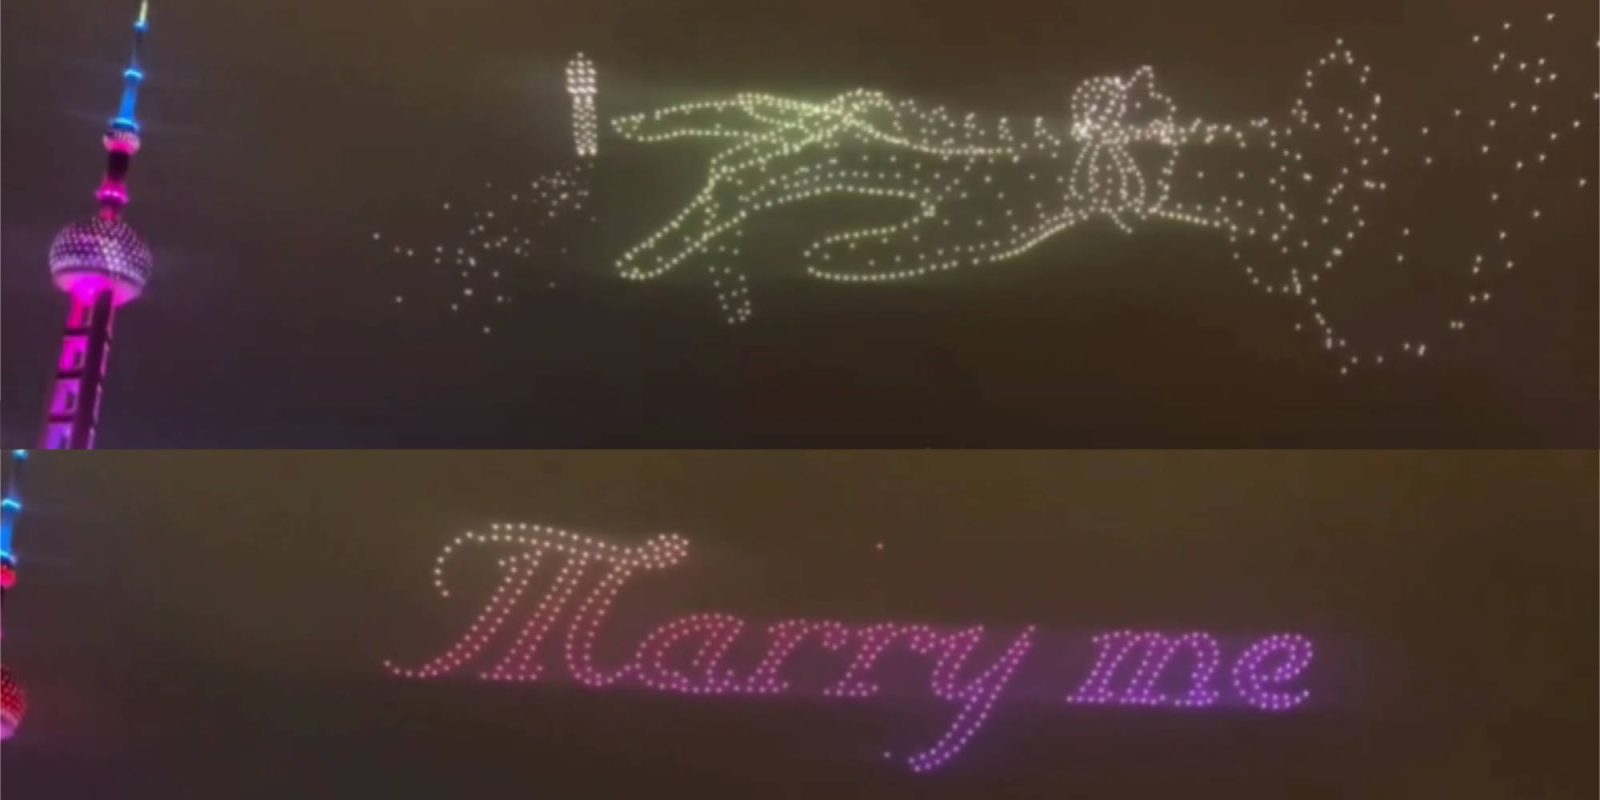 Marriage proposal drone show